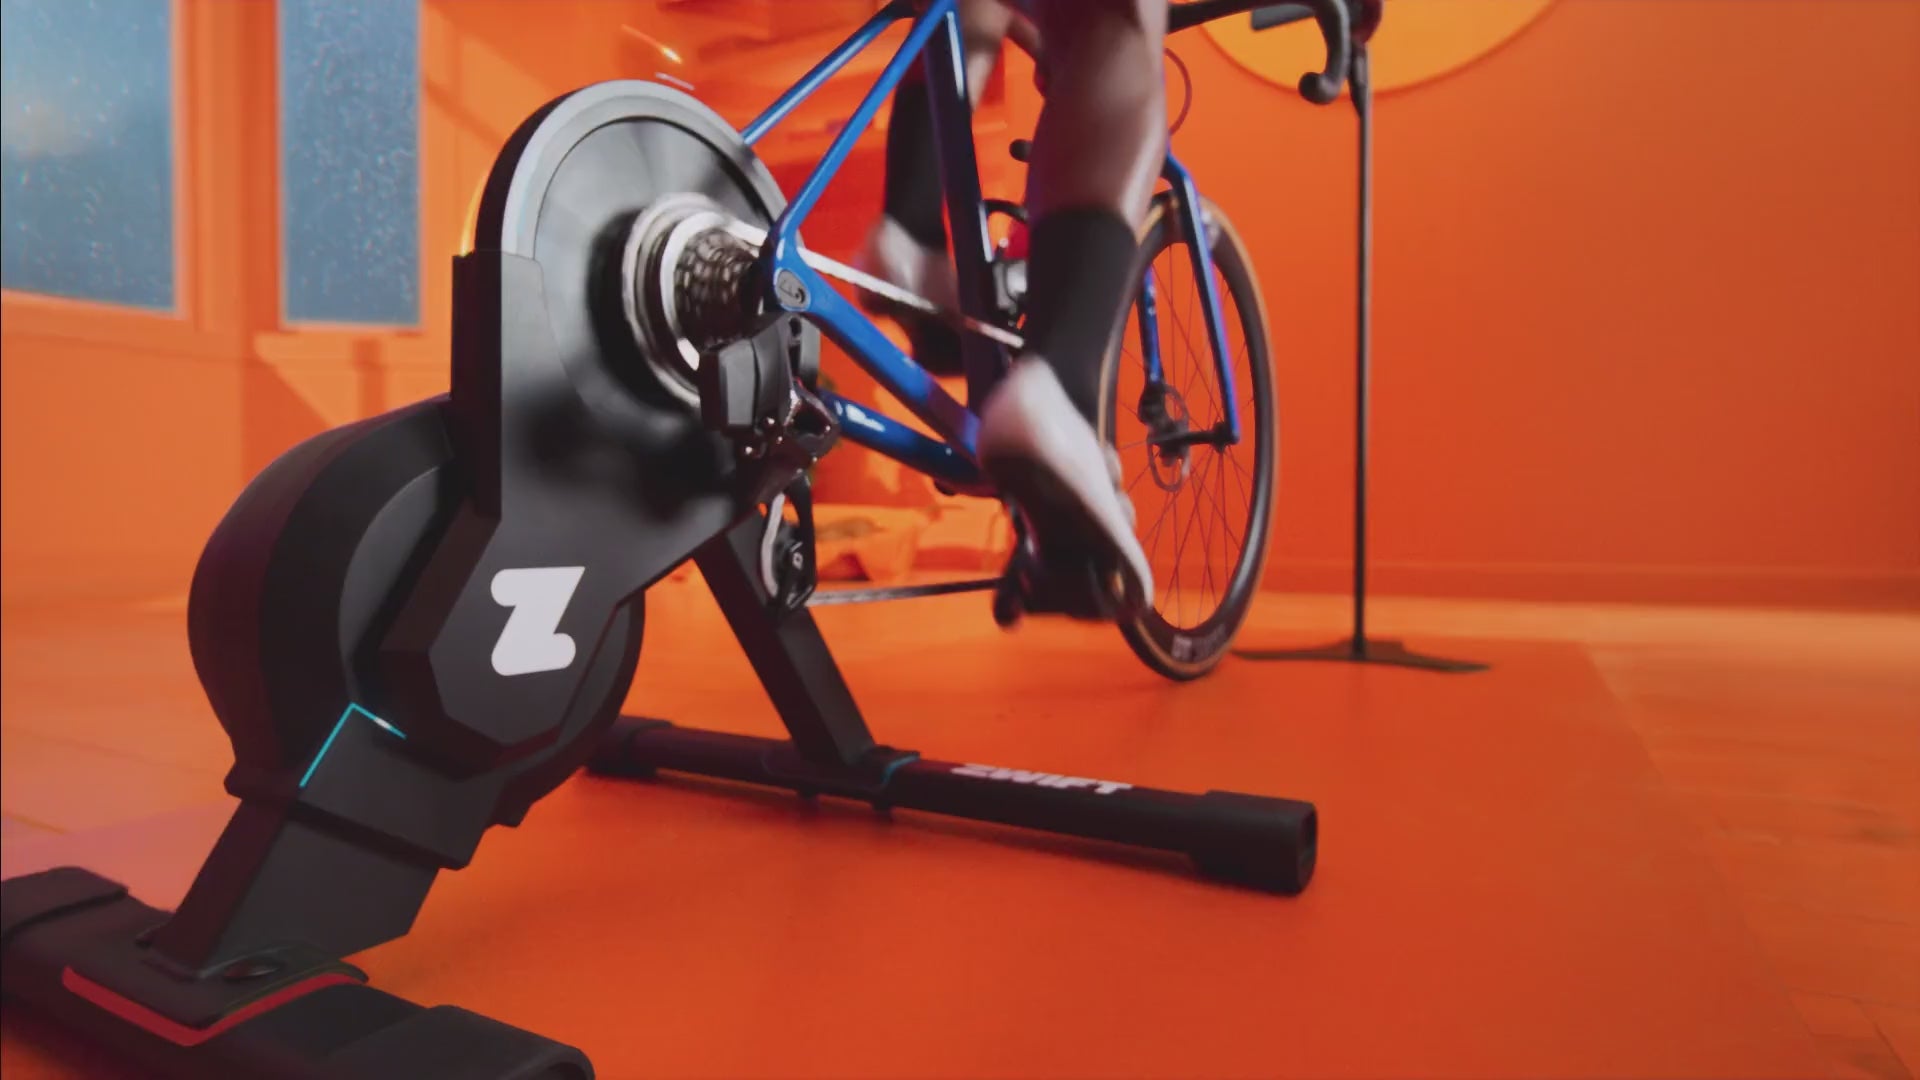 Indoor Cycling and Running Virtual Training App